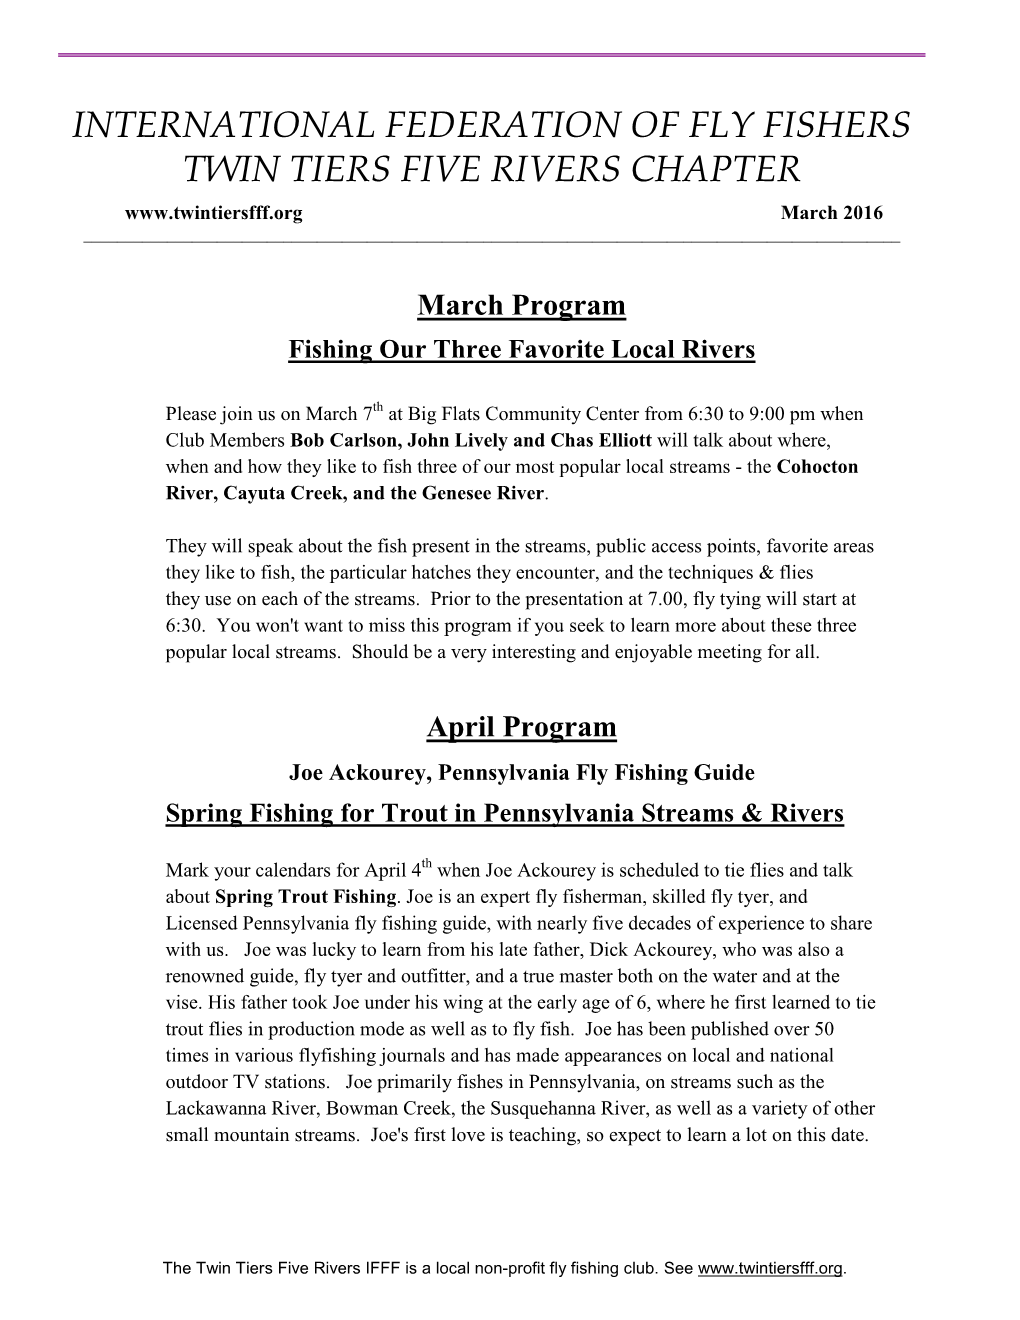 International Federation of Fly Fishers Twin Tiers Five Rivers Chapter